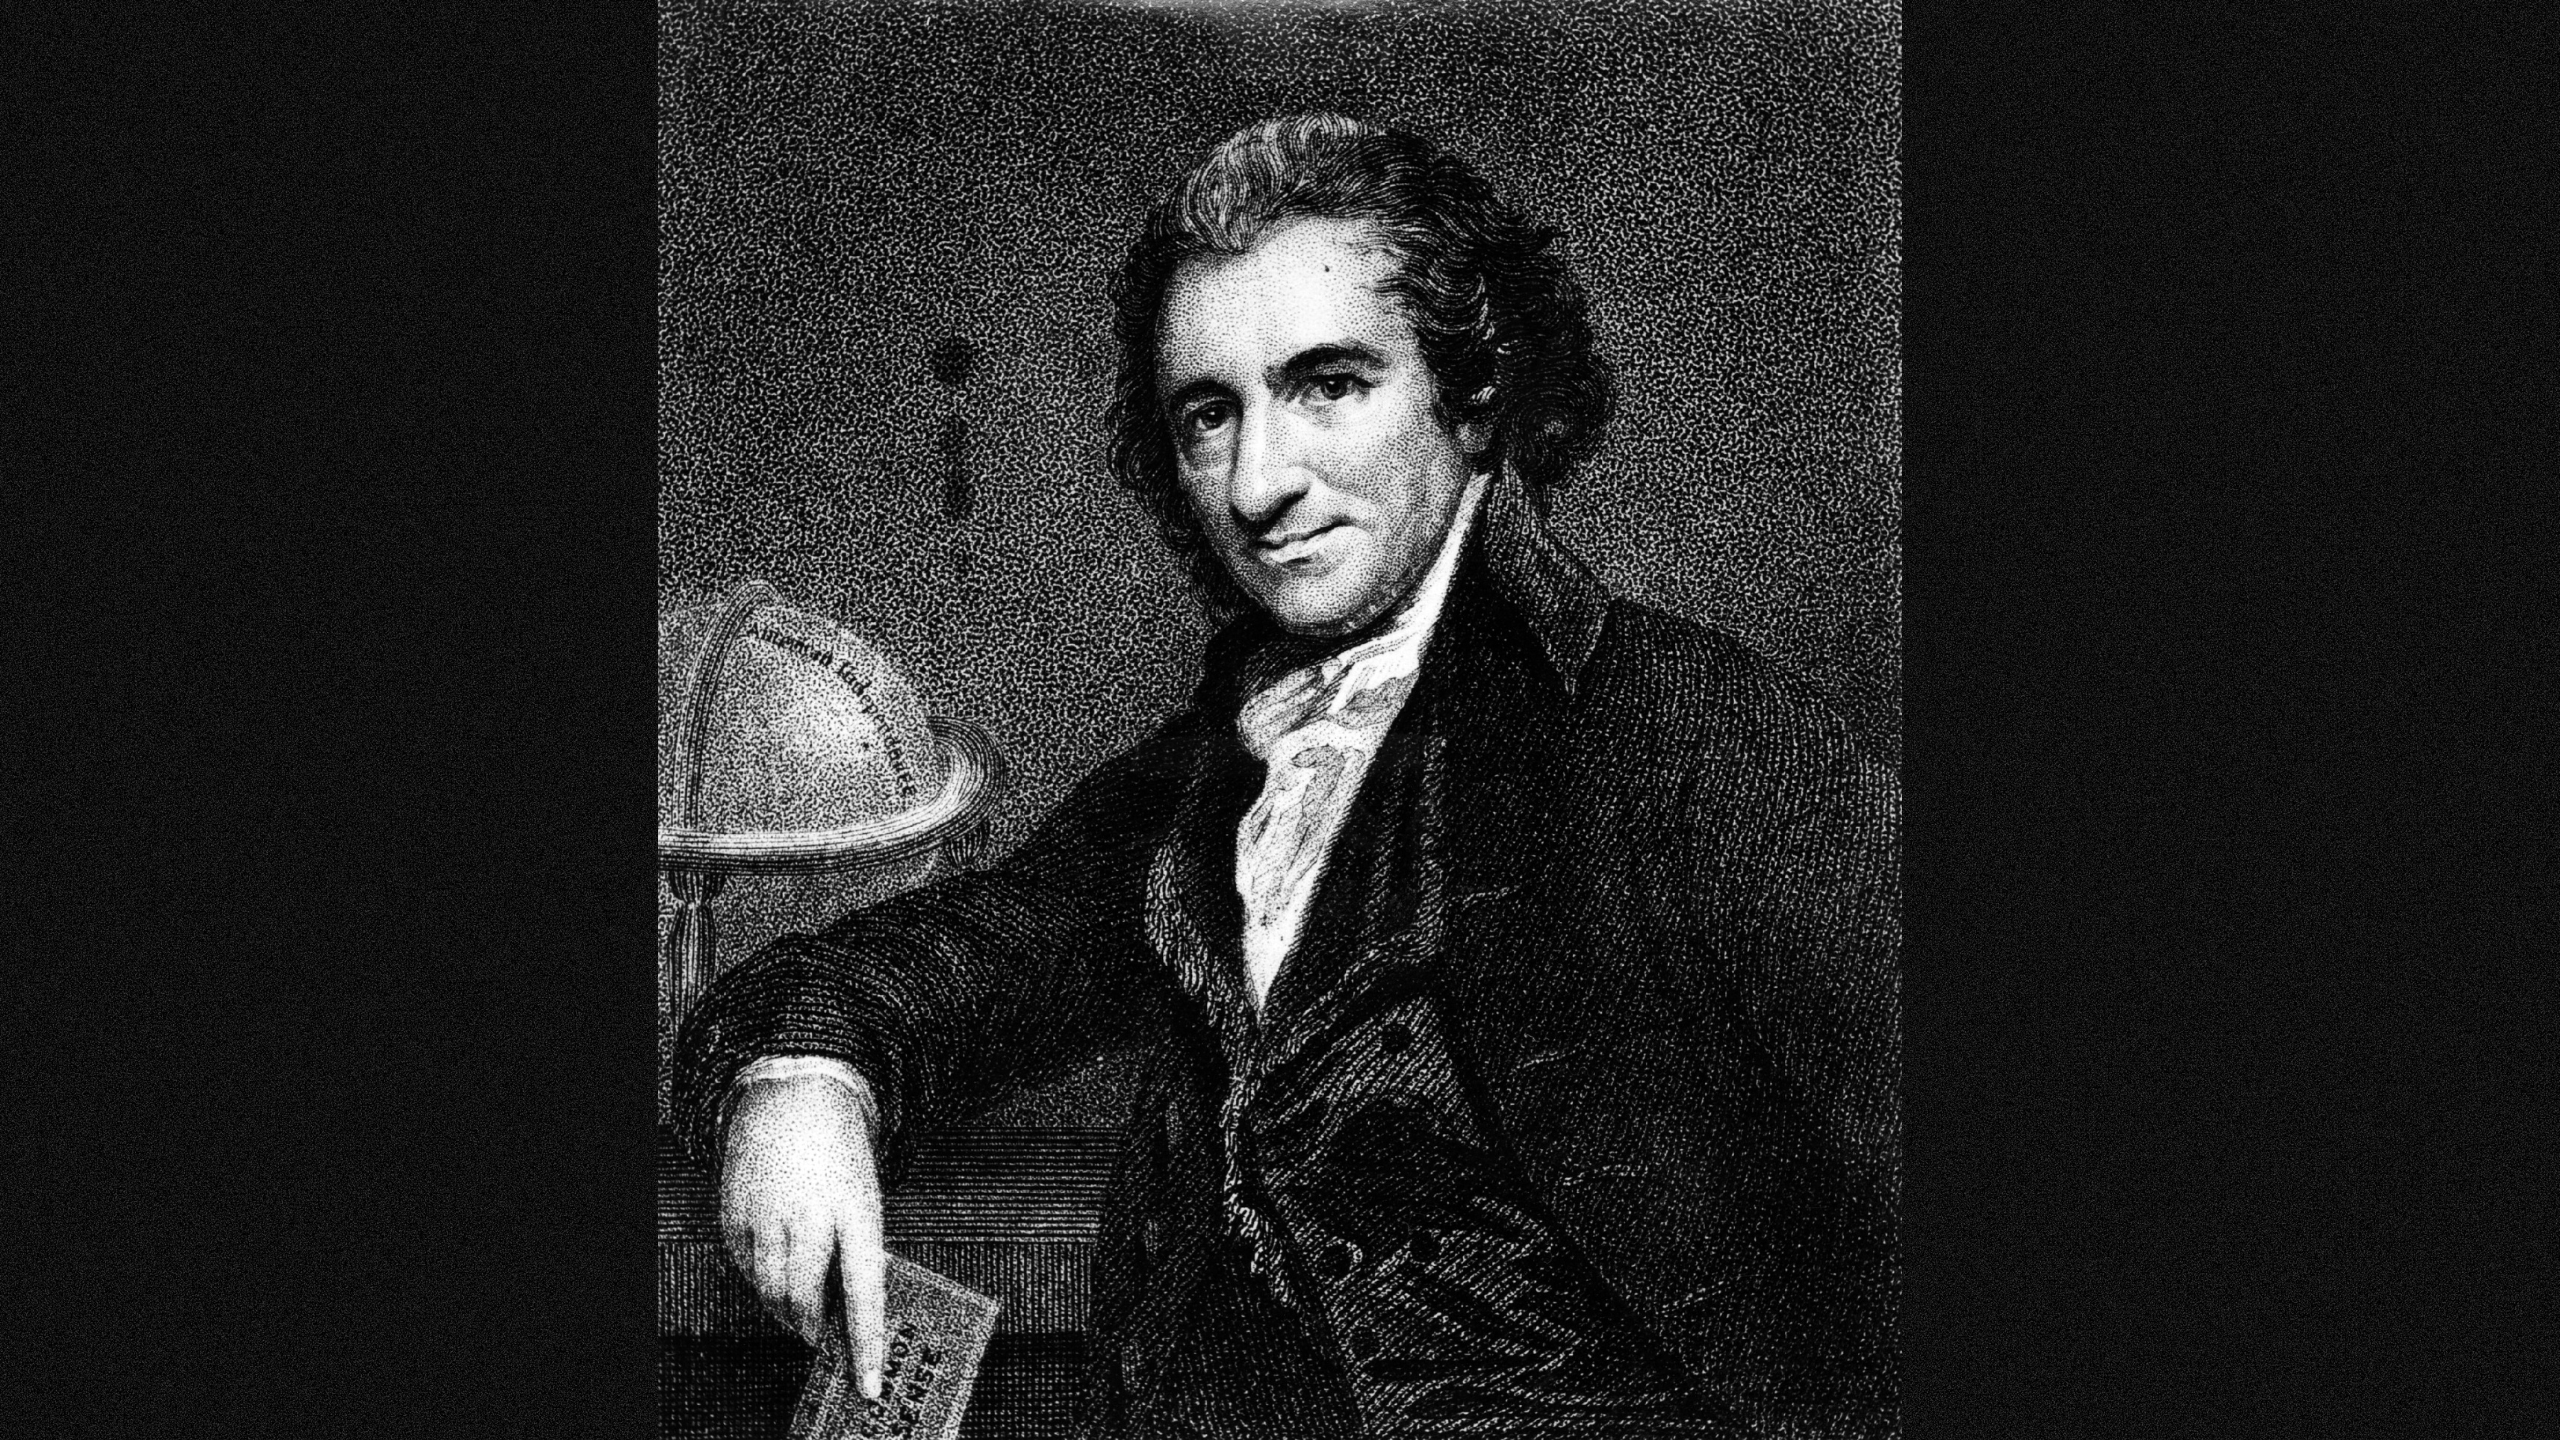 Thomas Paine ca. 1770 (Hulton Archive via Getty Images)